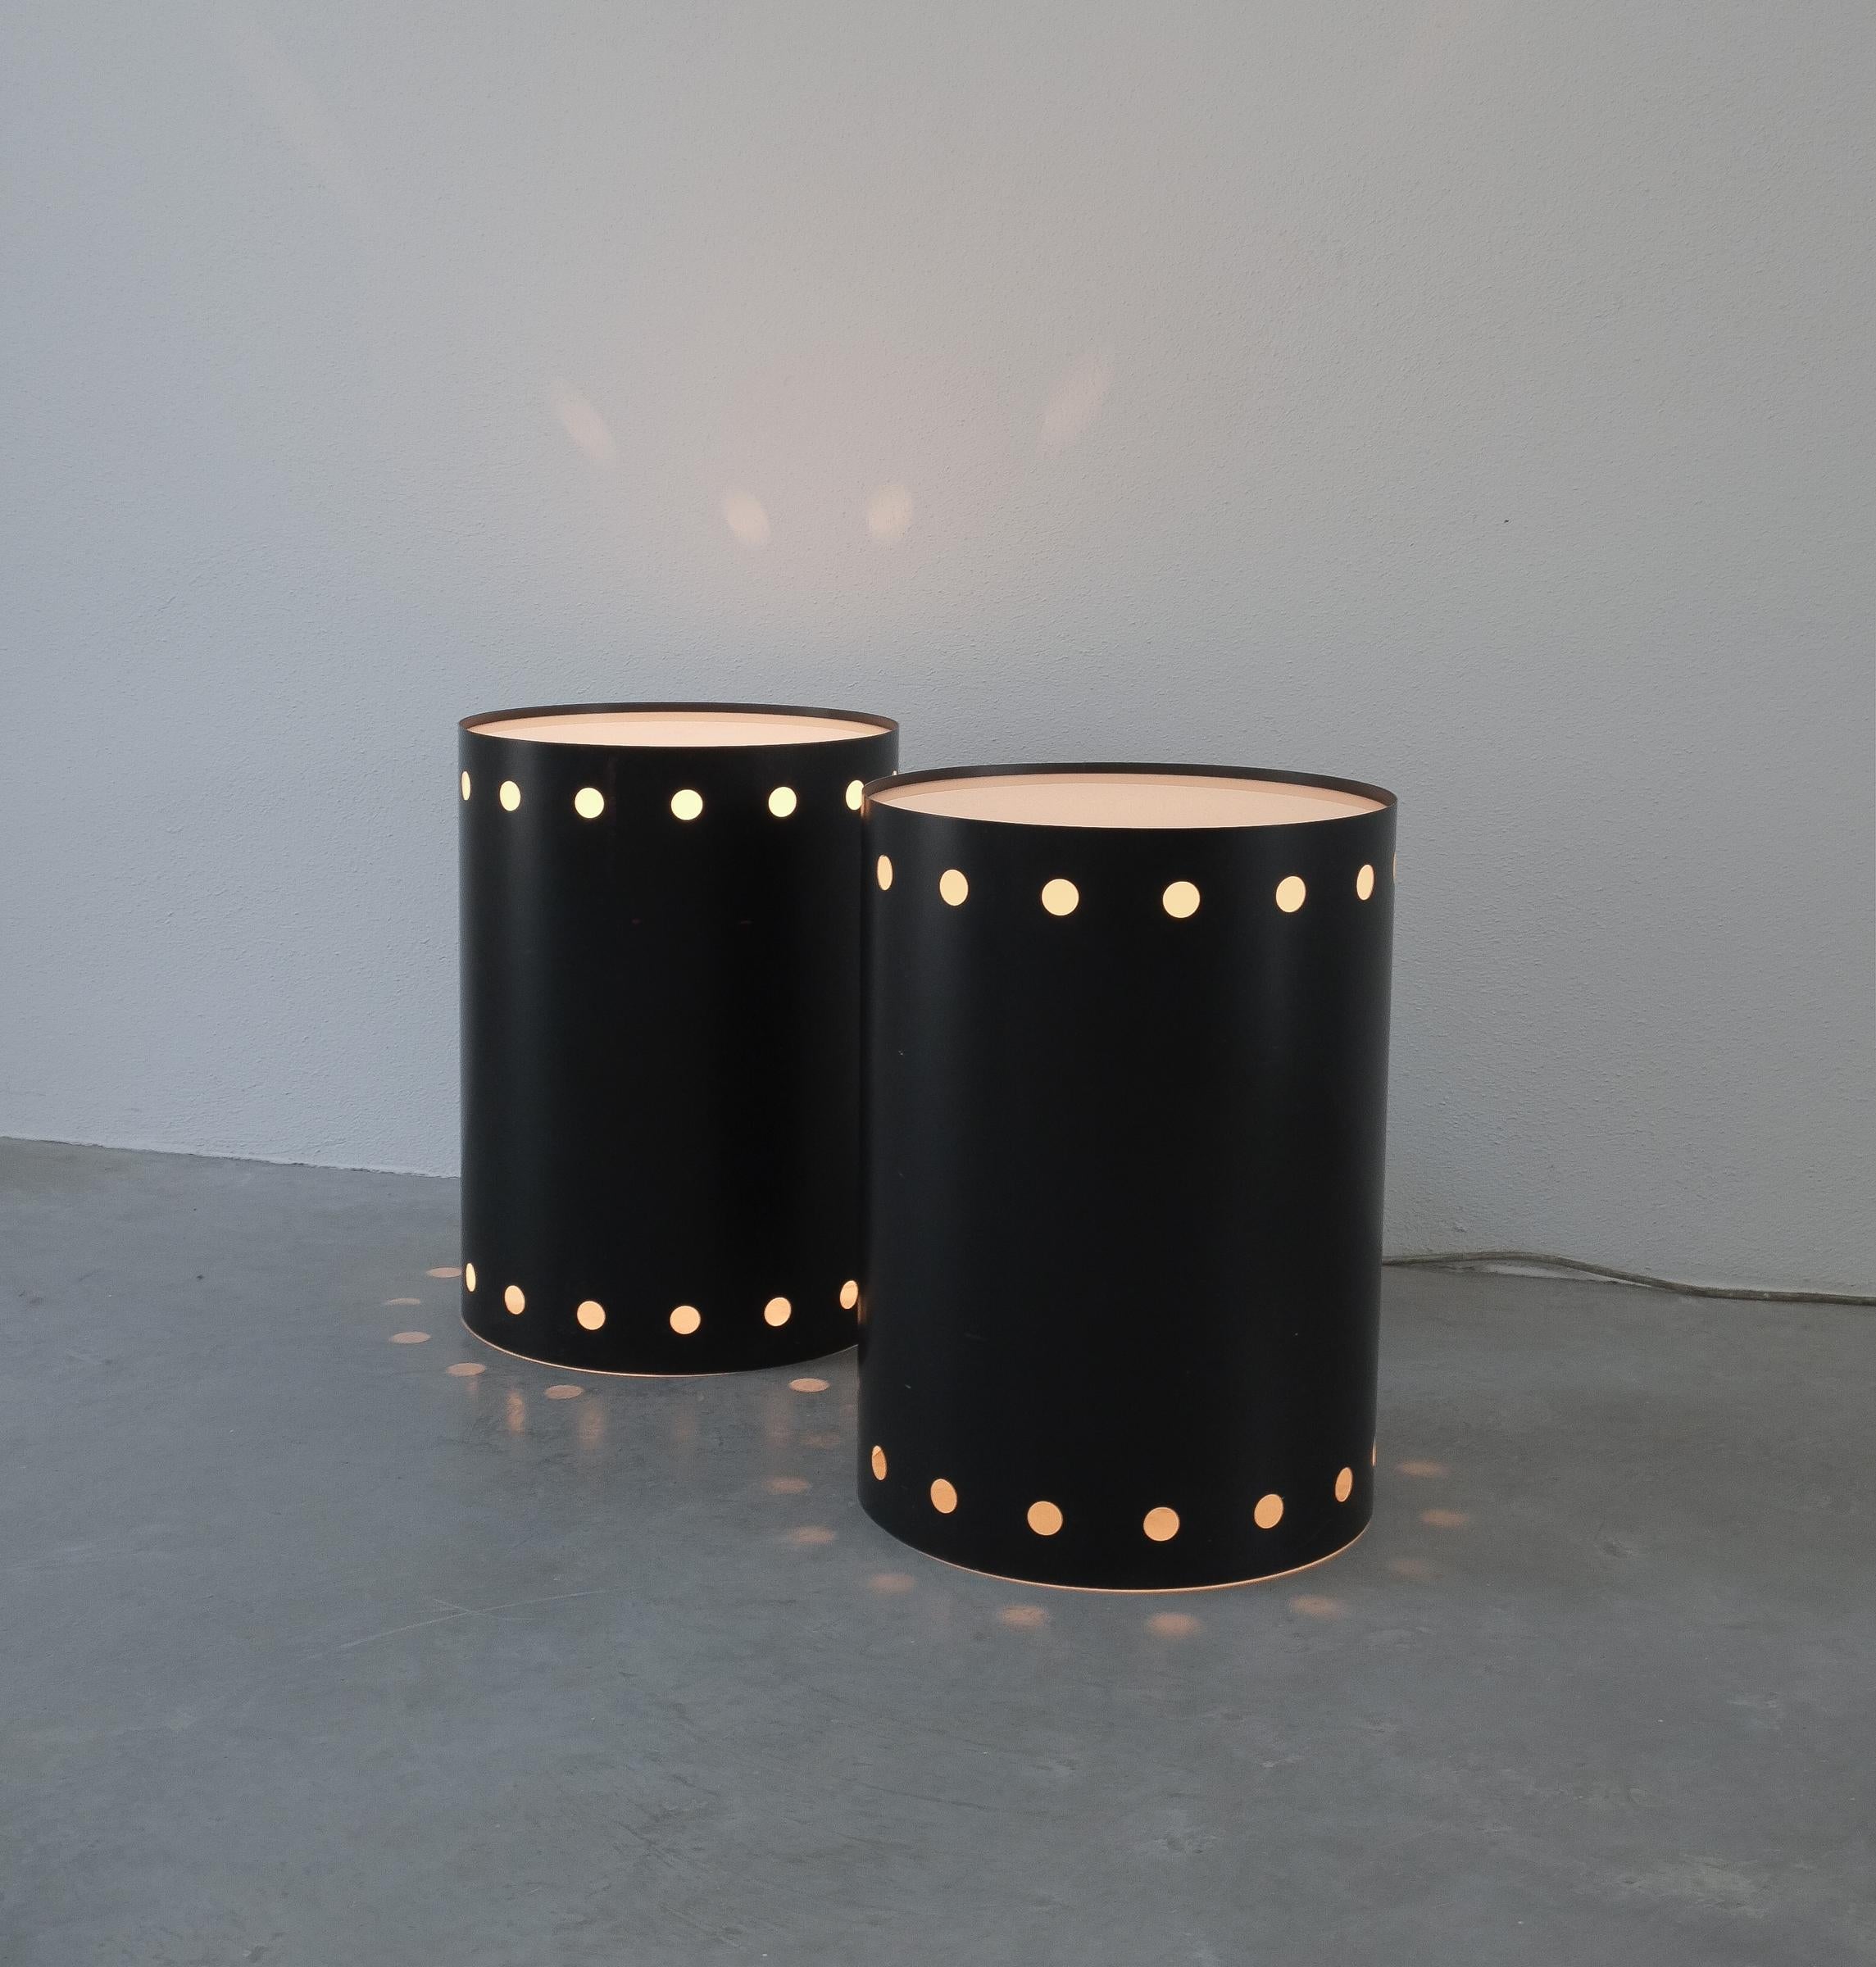 Black floor lights that will also work as bed side tables with lights, Germany circa 1965- sold as a pair

Very rare and large tubular blackened steel side tables or floor lamps that work with dimmable lamps. Stunning 1960 design made from steel